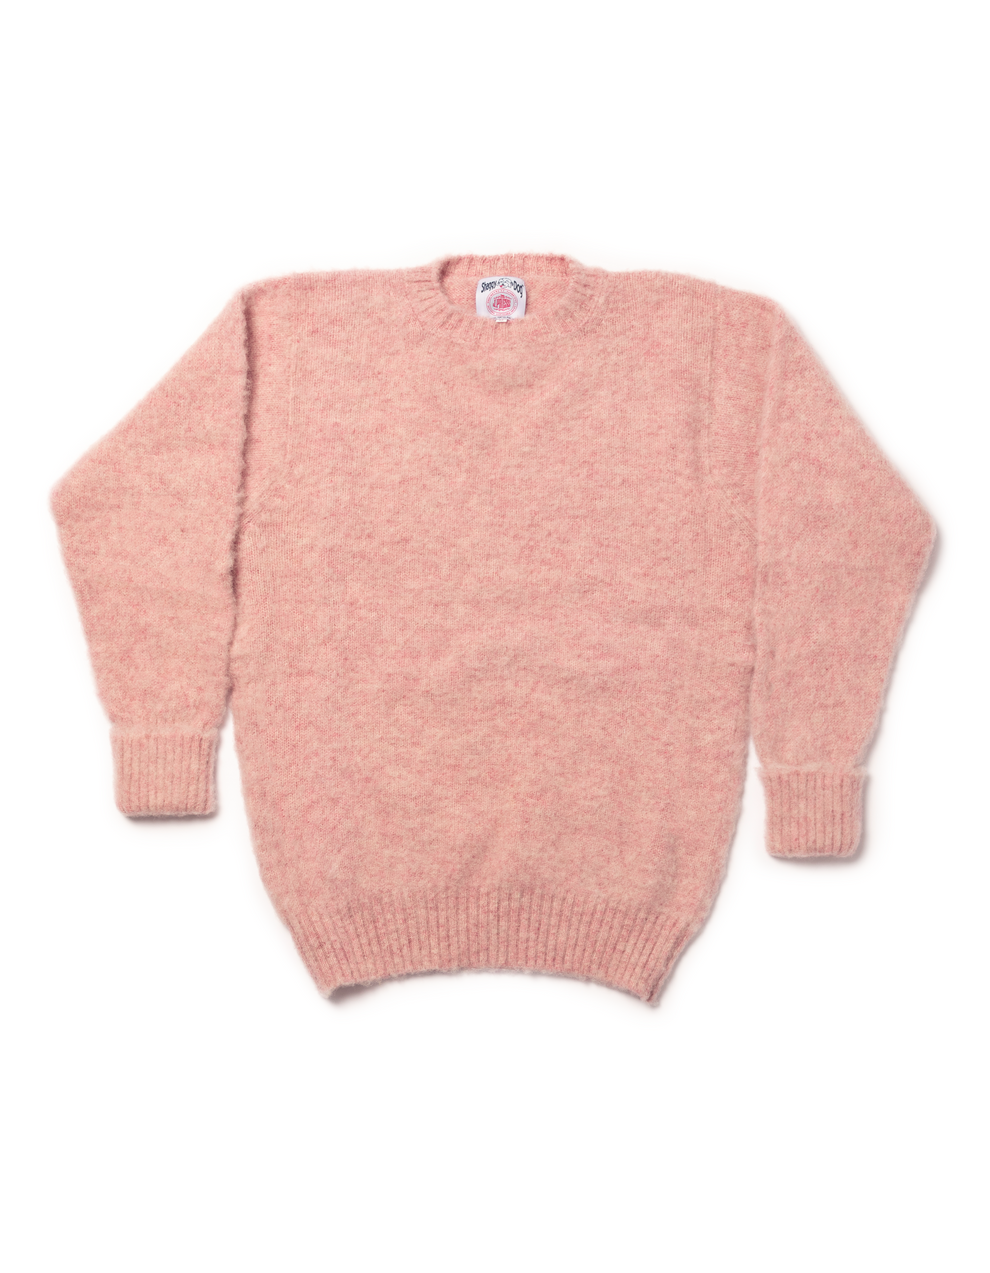 Shaggy Dog Sweater Pink Heather - Classic Fit | Men's Sweaters – J. PRESS